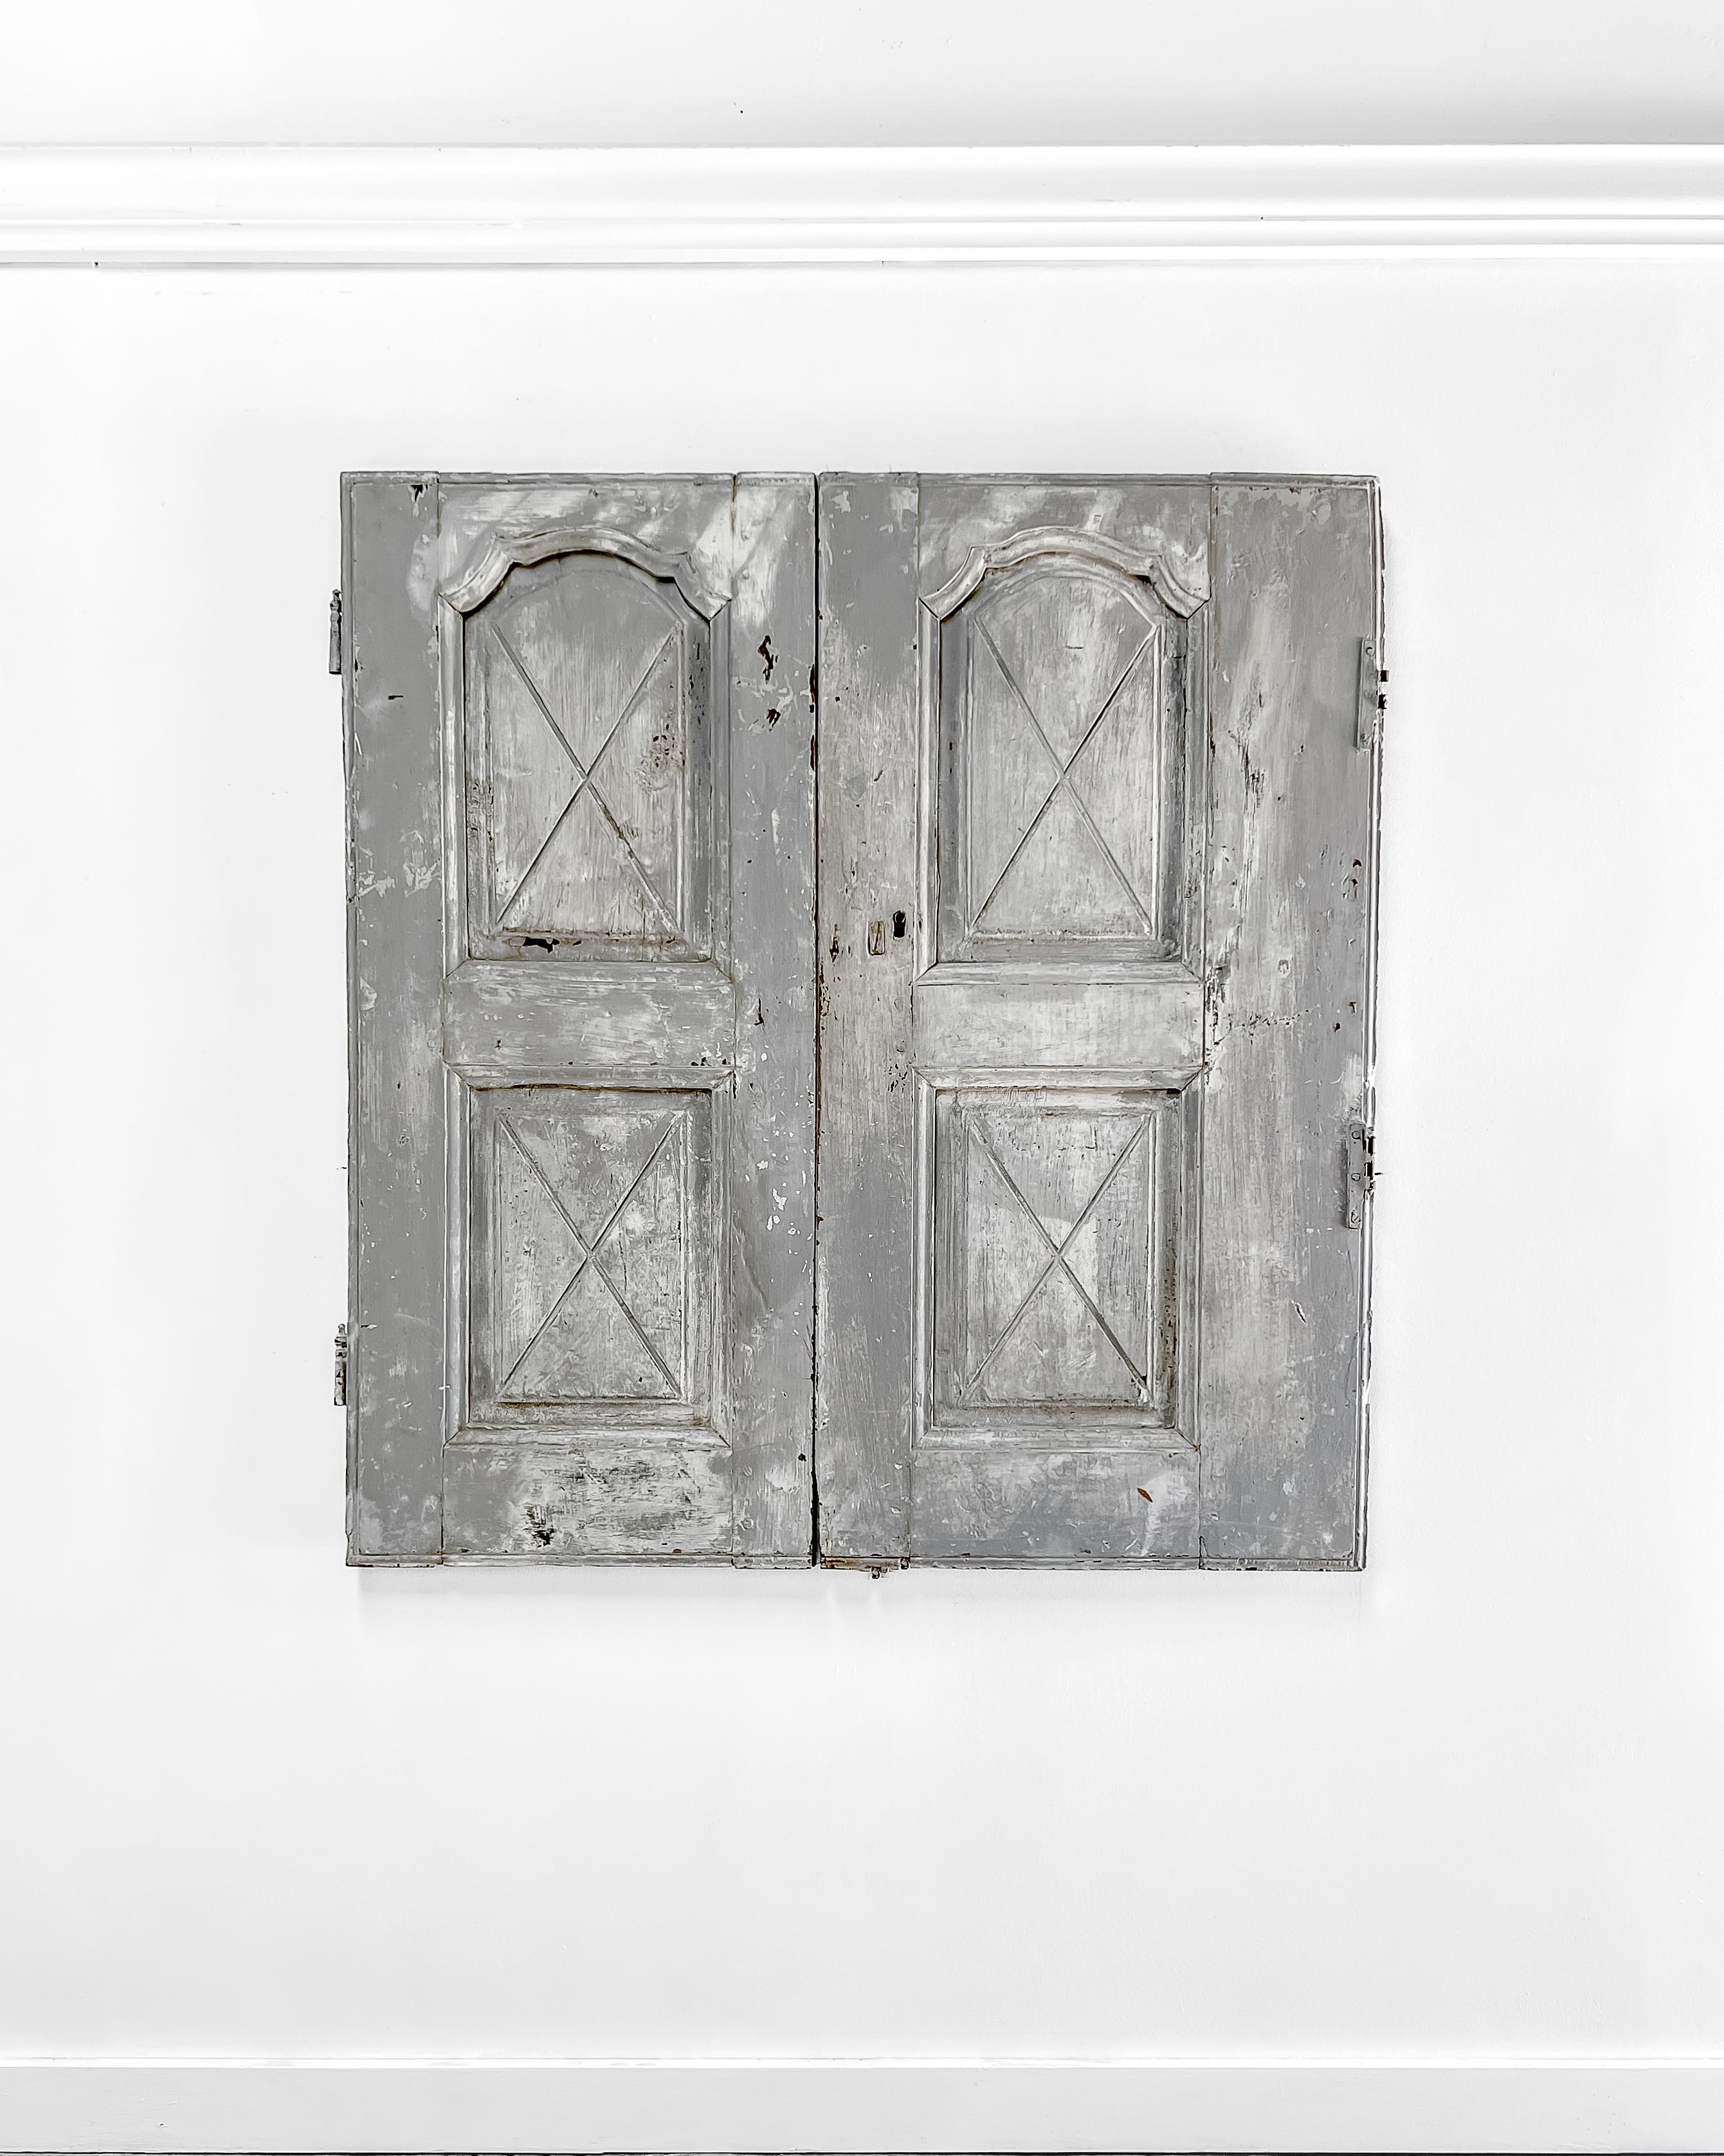 A pair of reclaimed provincial paneled cupboard doors with wonderful X-decoration details. Enclose a built-in cabinet with this charming pair of doors to feel as if you’ve been transported to the French countryside.

Salvaged in France, circa